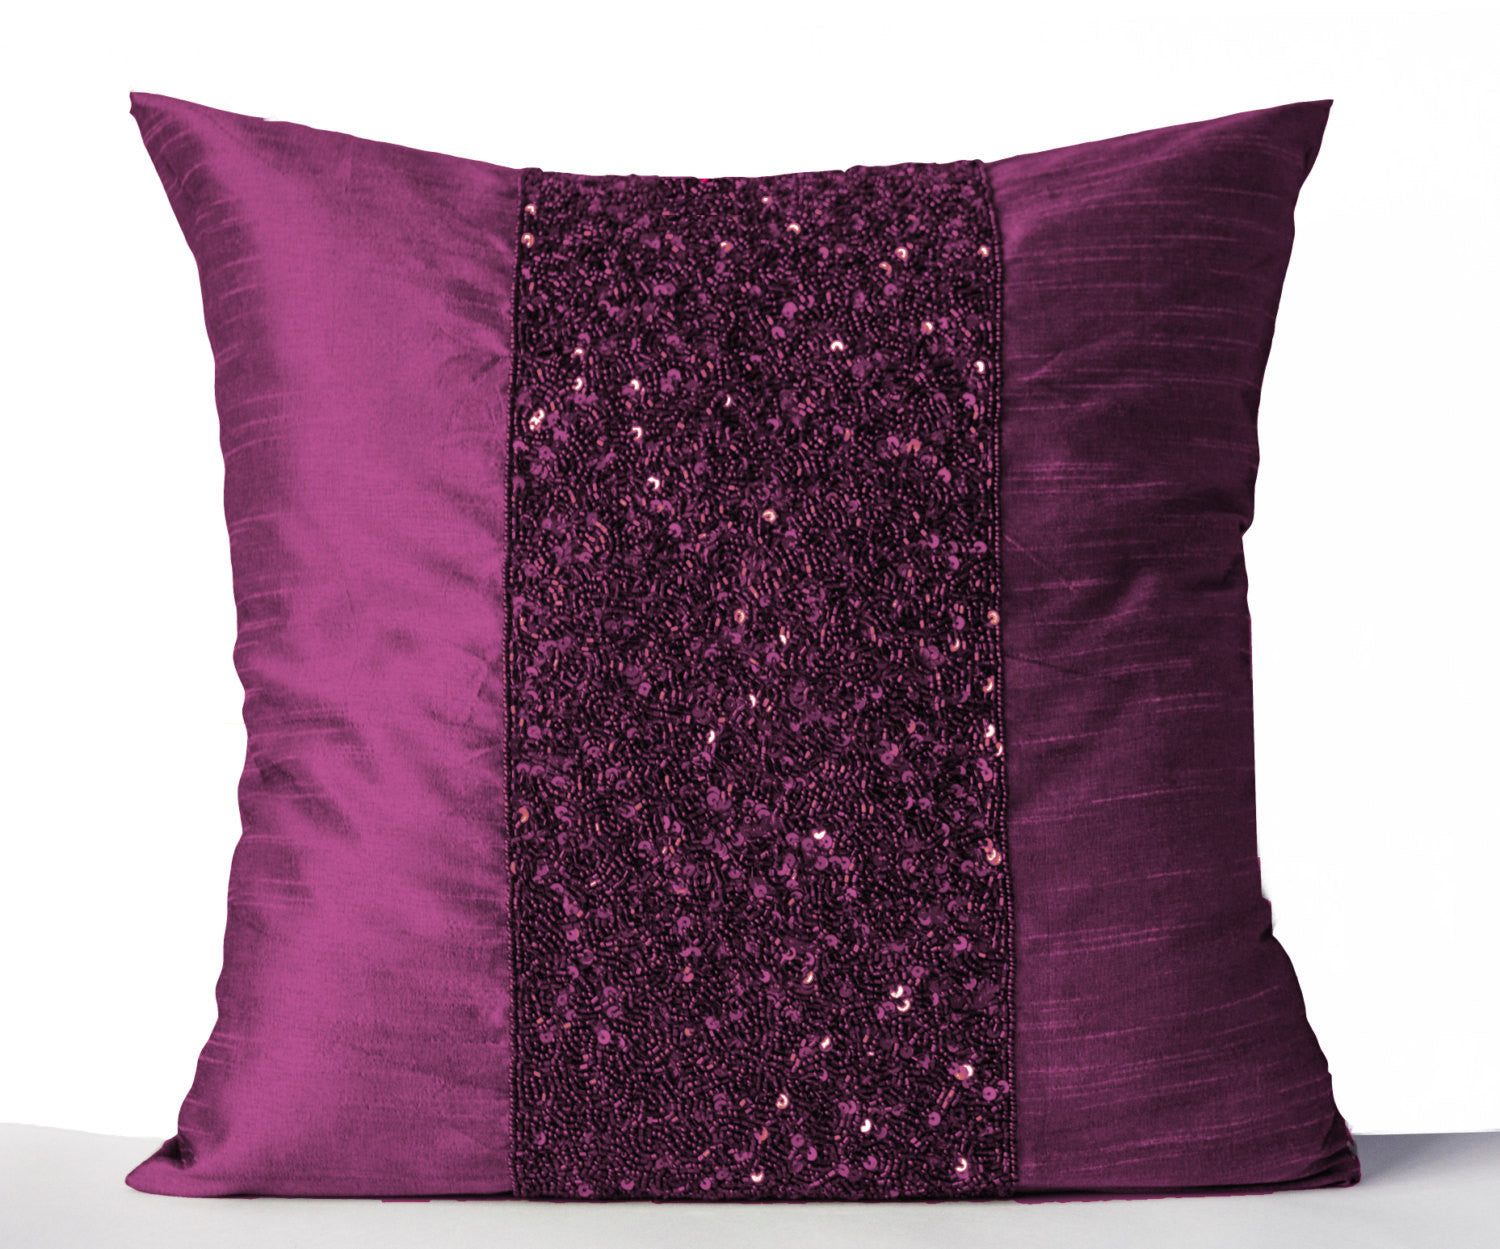 Handmade purple sparkle throw pillows with beads and sequin